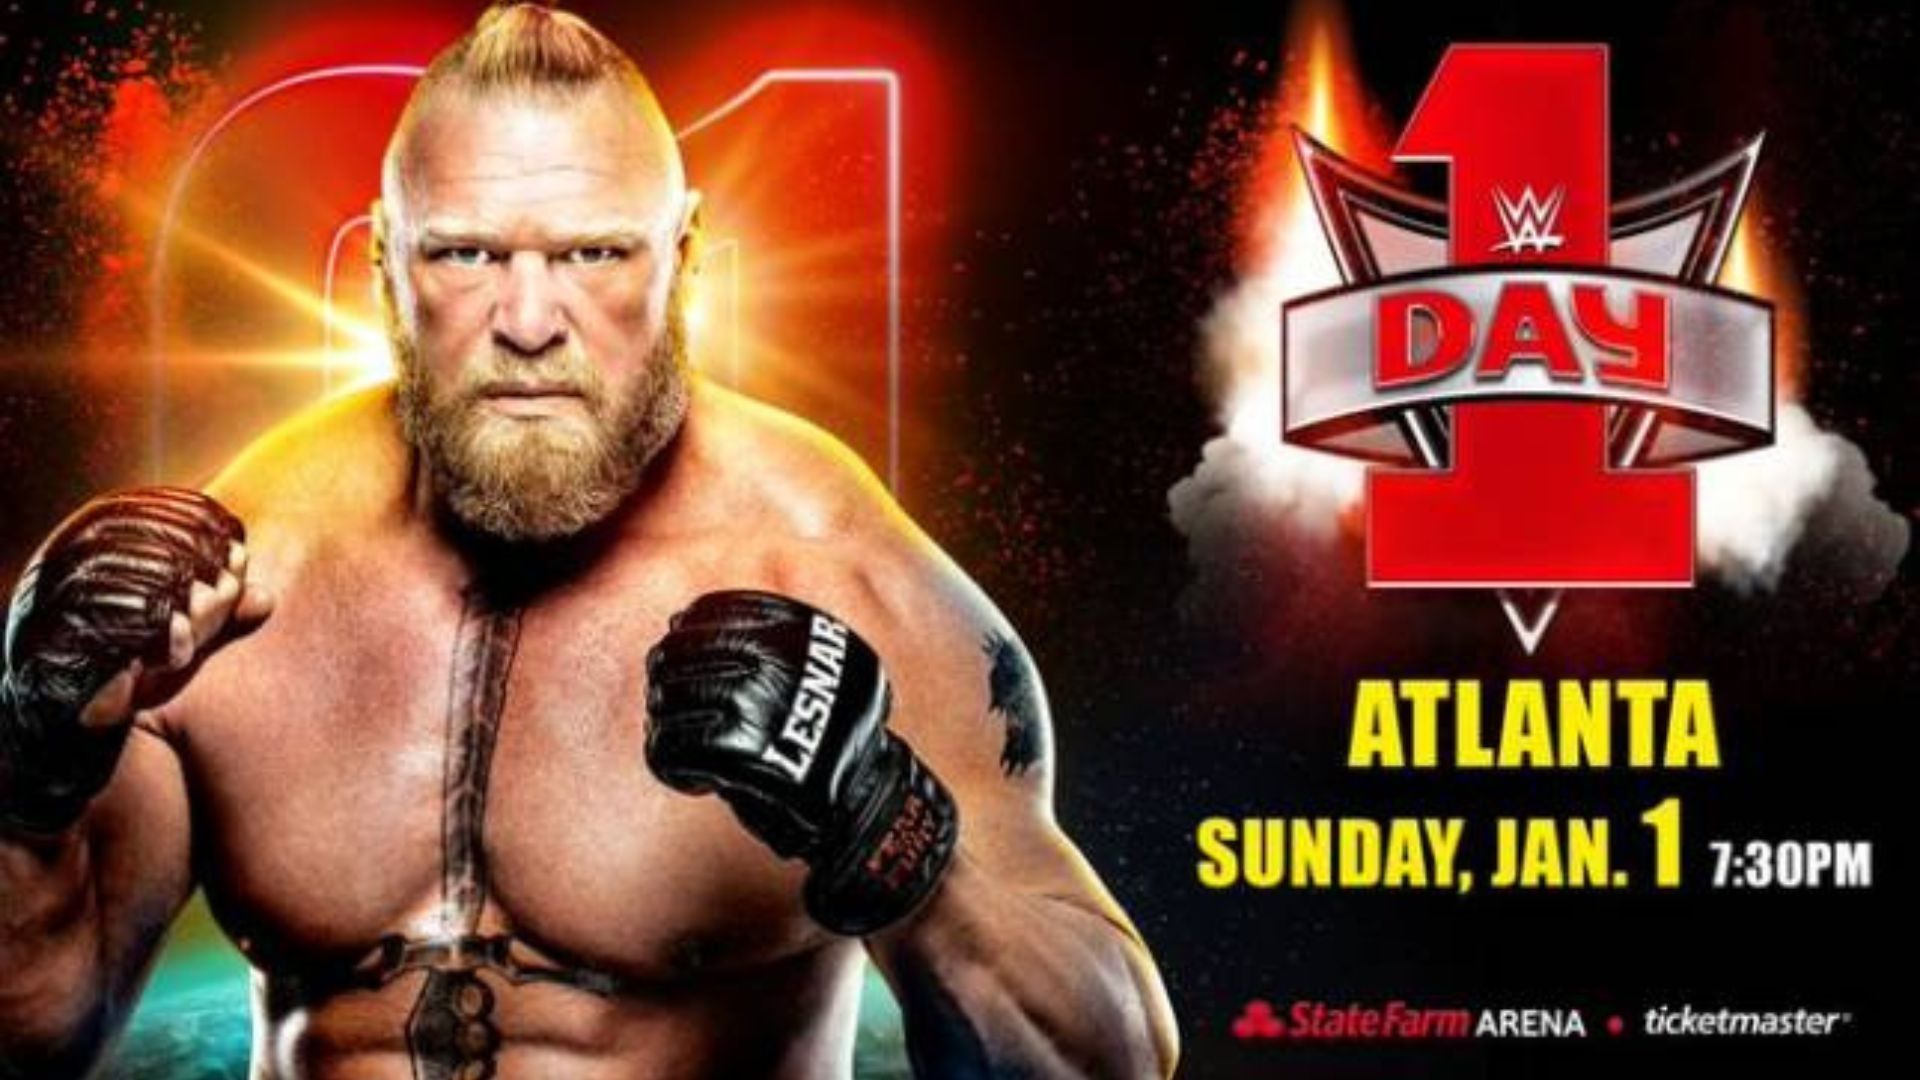 WWE Day 1 may have been canceled